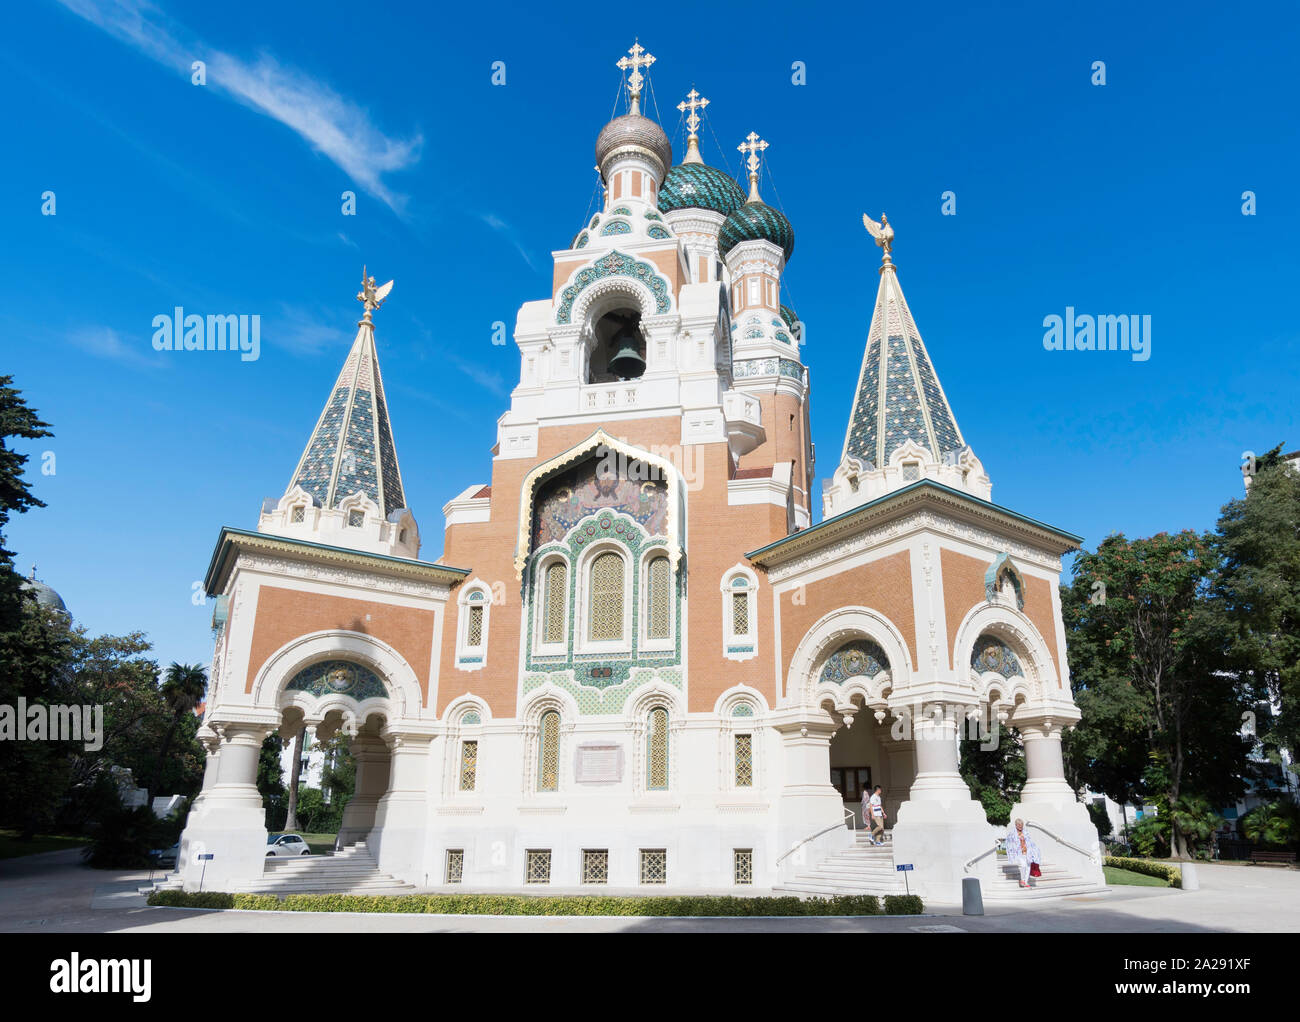 The St Nicholas Russian Orthodox Cathedral in Nice, France, Europe Stock Photo